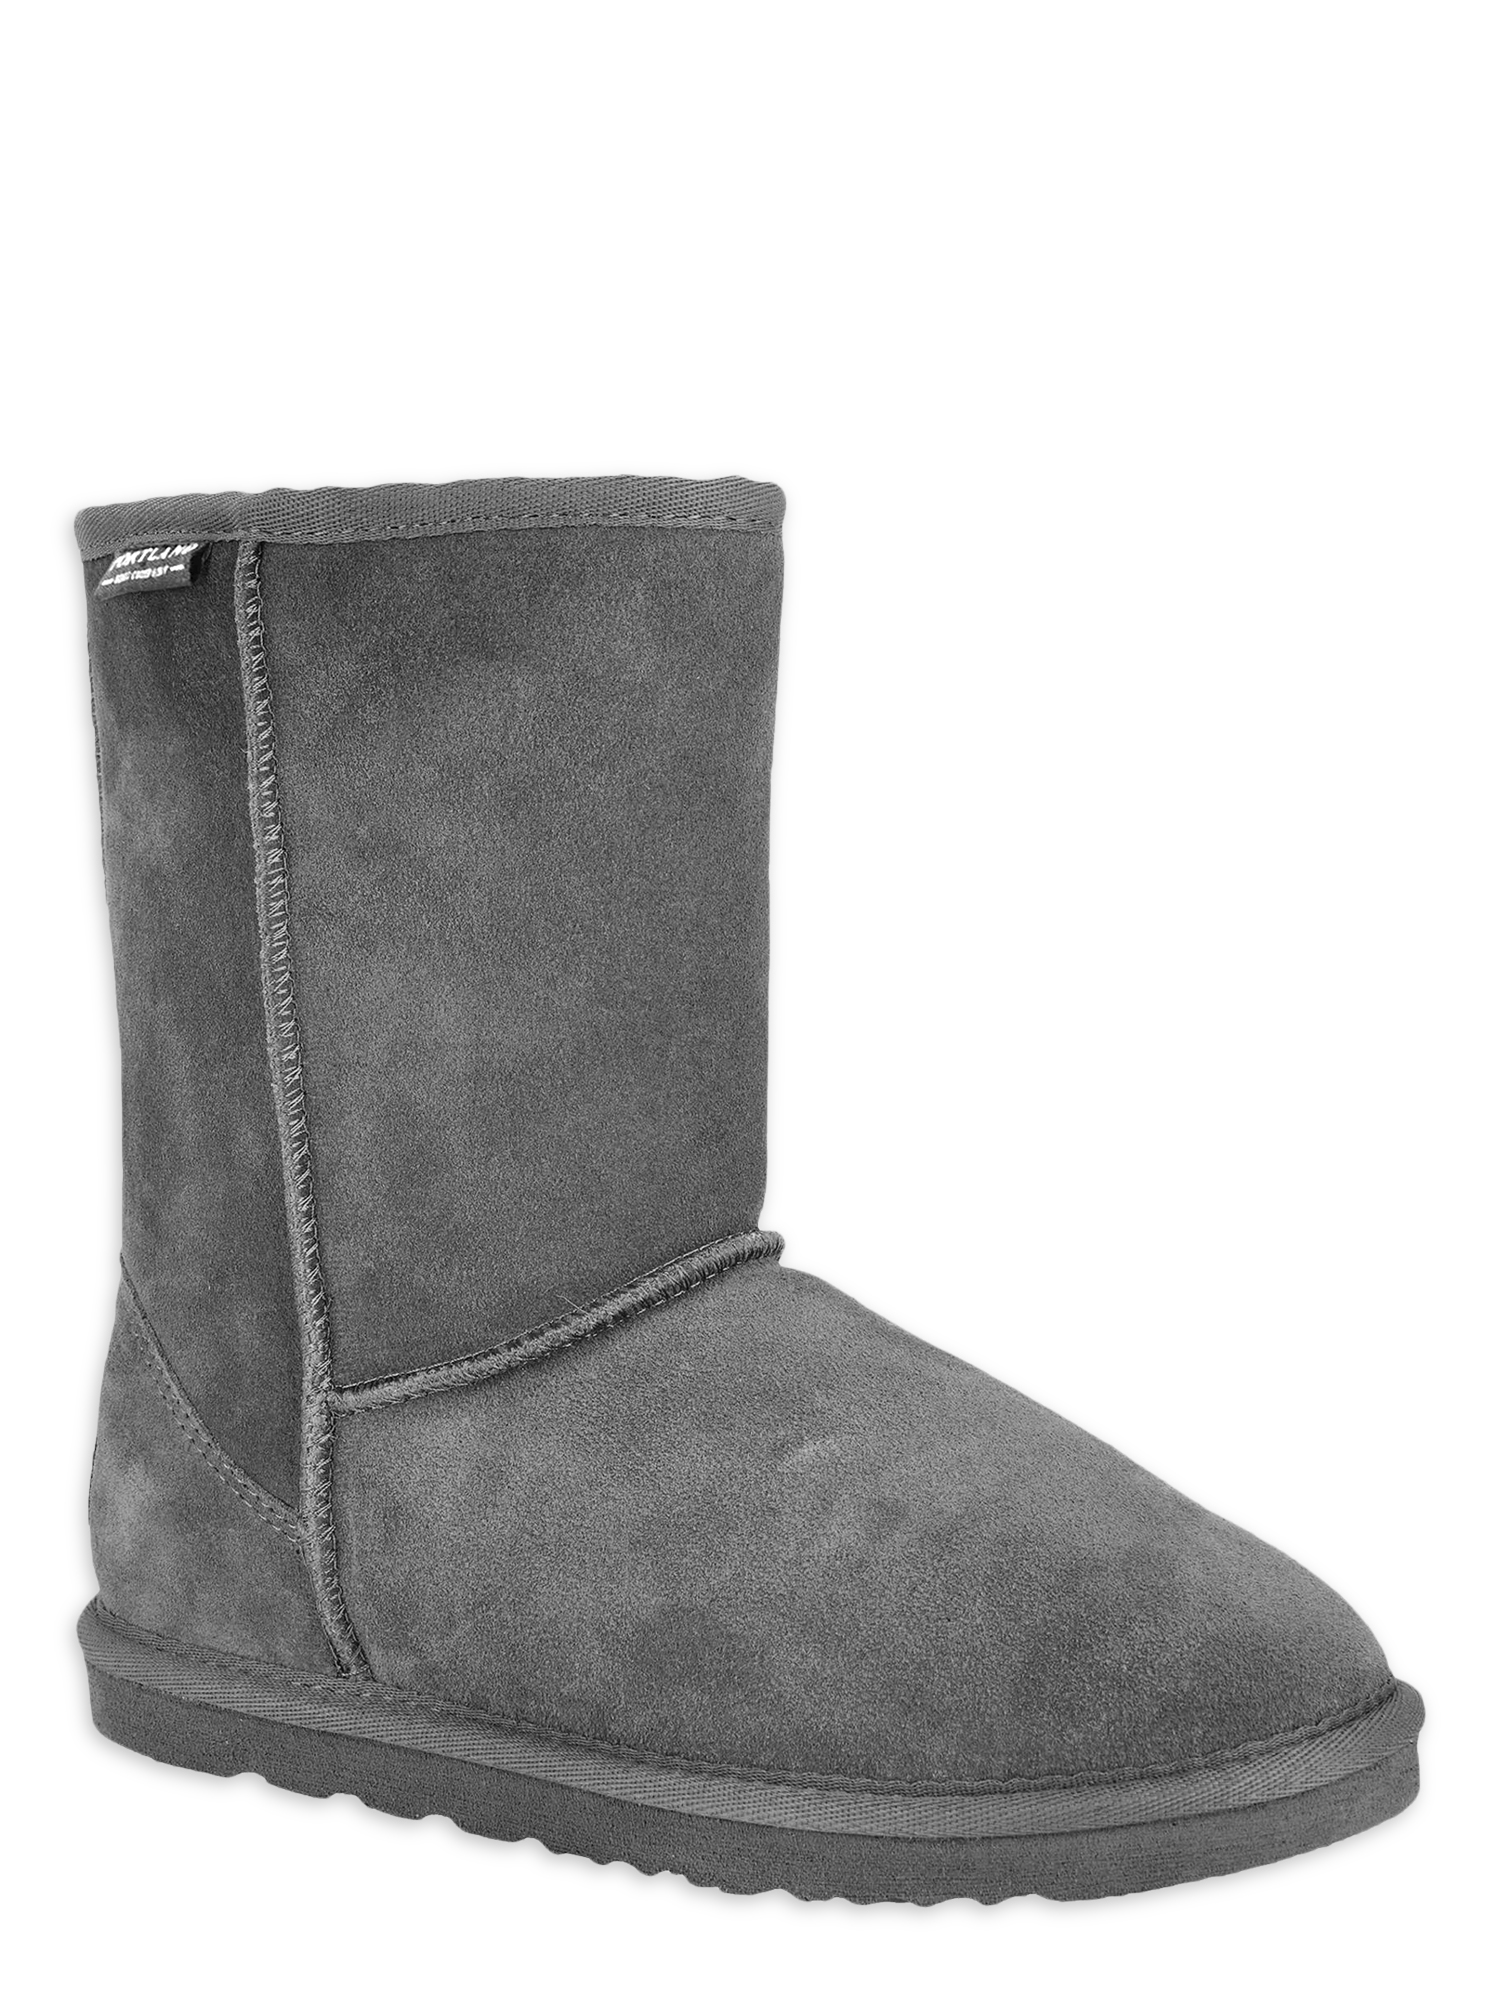 Portland Boot Company Women's Maryanne 8" Suede Winter Boot - image 1 of 5